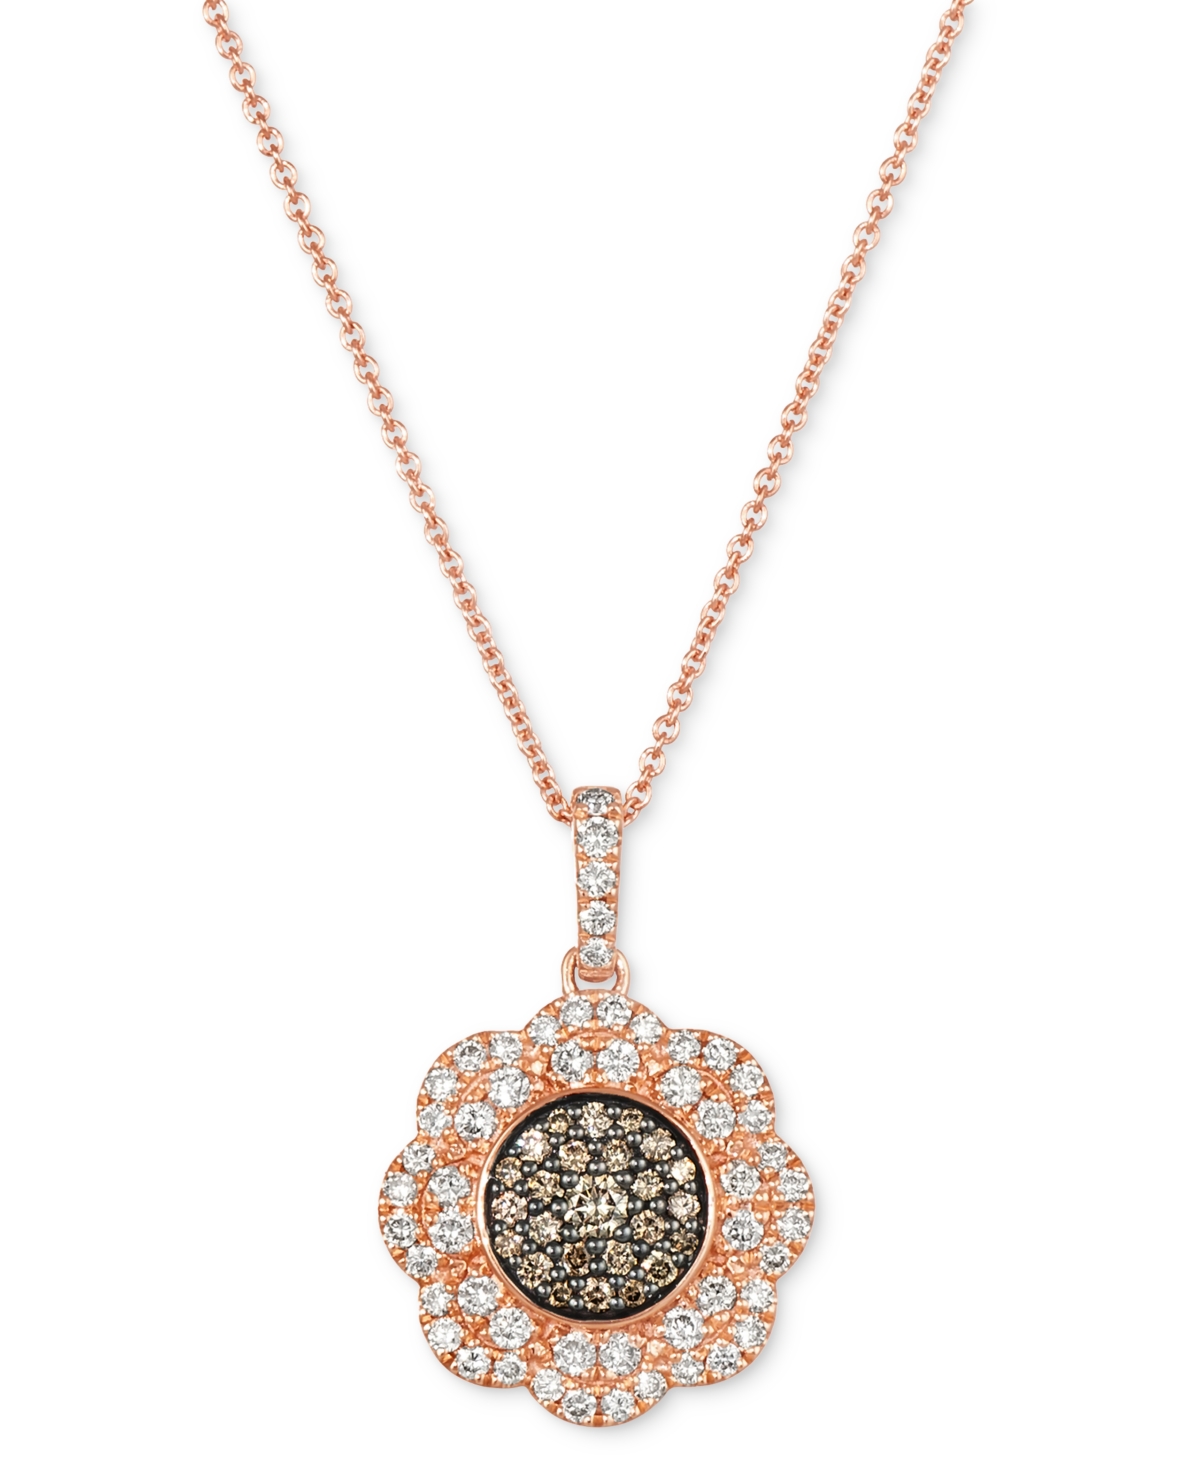 Le Vian Chocolate Diamond & Nude Diamond Flower Cluster 18" Adjustable Pendant Necklace (3/4 Ct. T.w.) In 14 In K Strawberry Gold Pendant